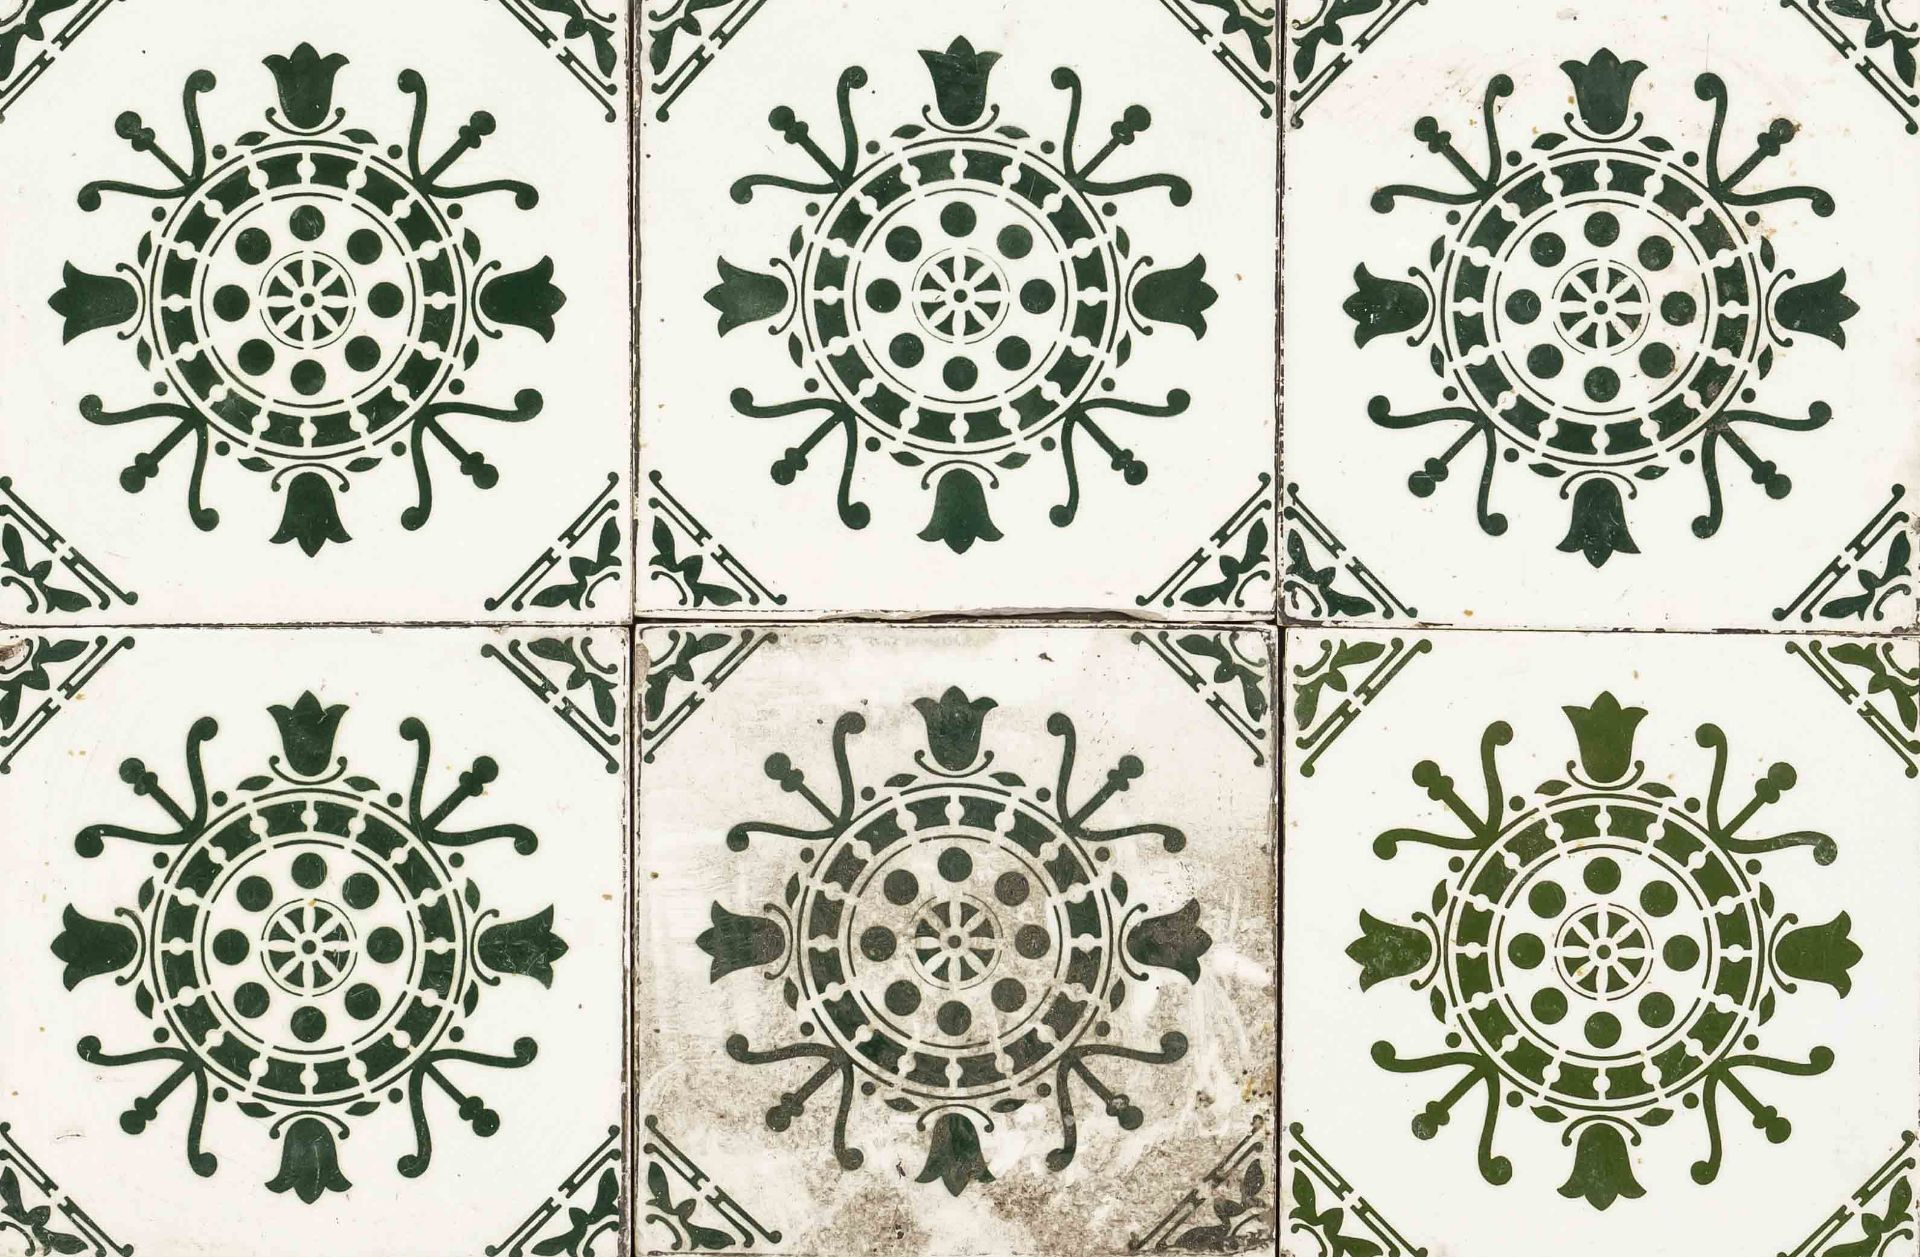 54 Art deco tiles, 1930s. Stenciled and sprayed decoration in dark green with stylized tulips, edges